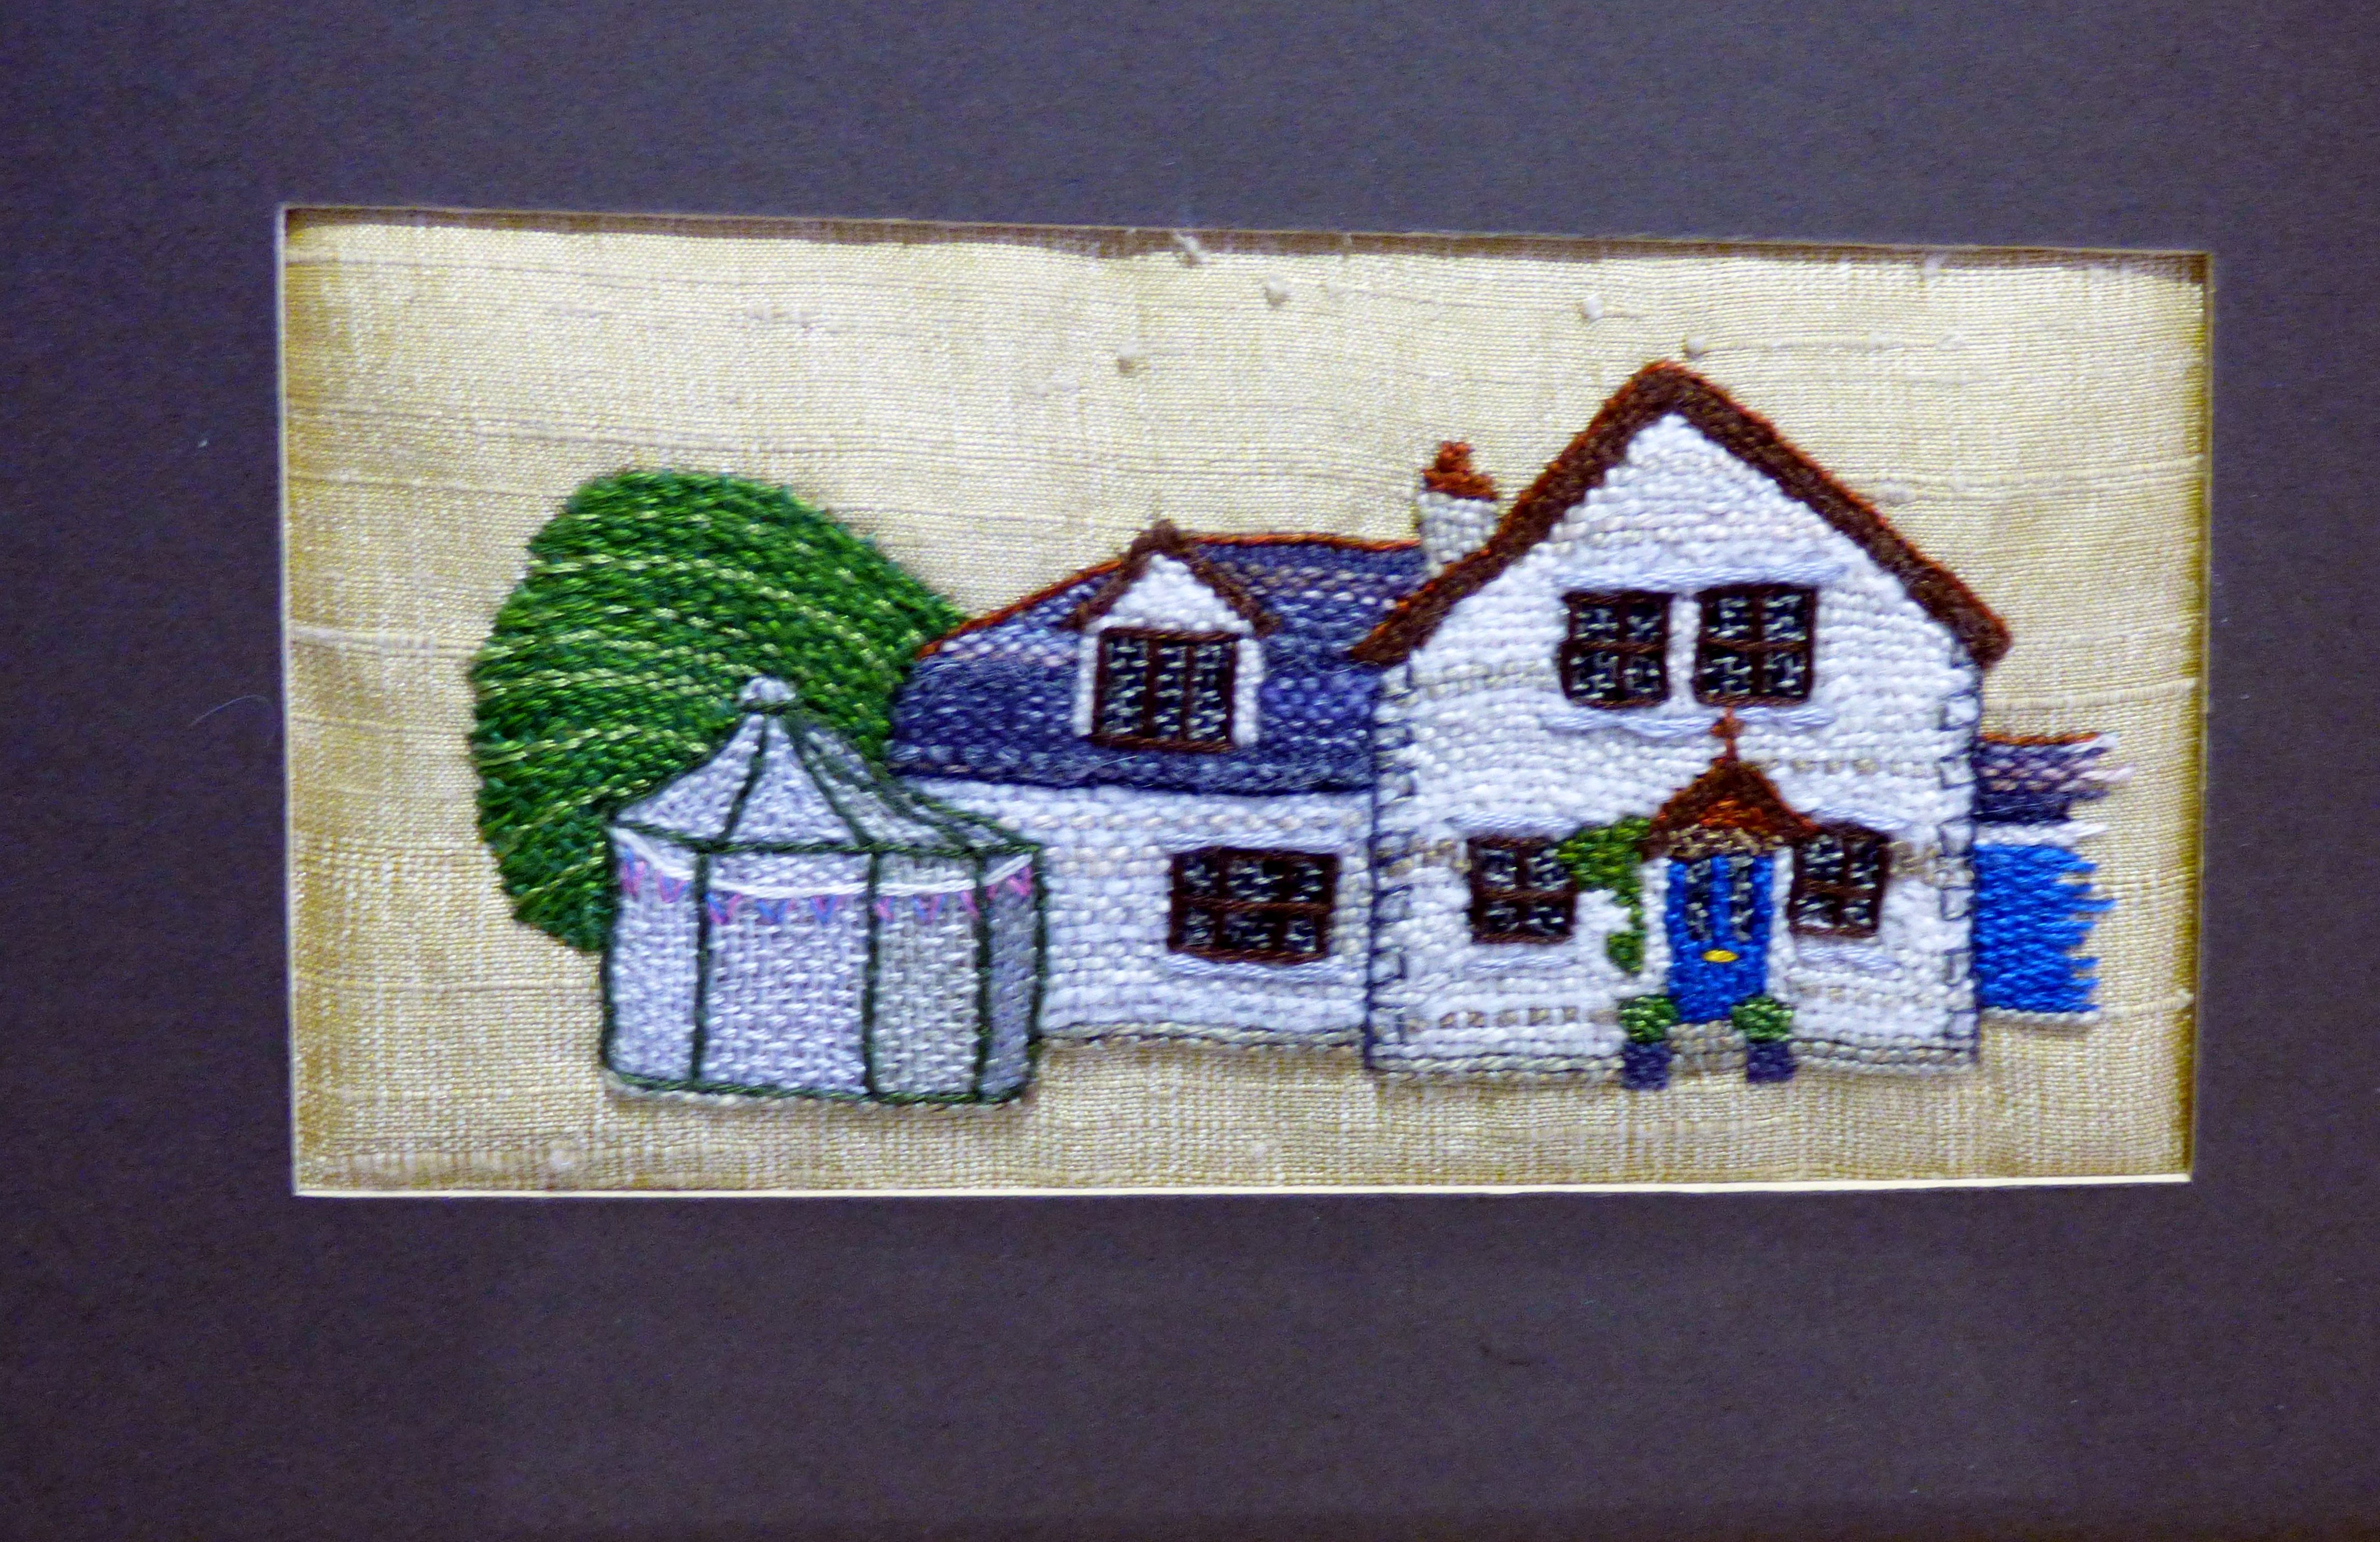 BRYN EITHIN by Marion Williams, N.Wales EG, hand embroidery